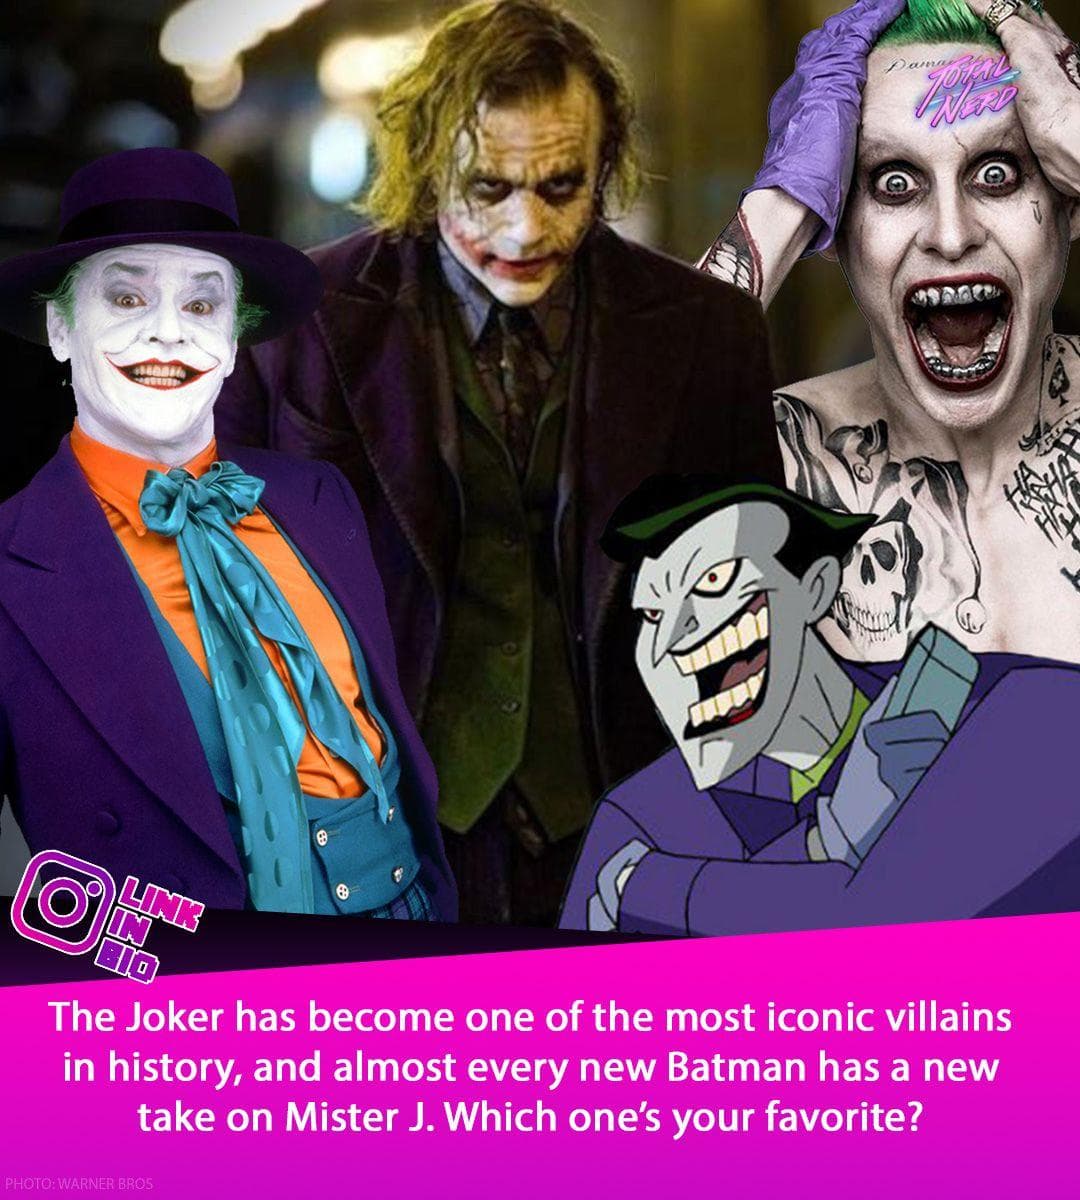 All Actors Who Have Played Joker Ranked Best To Worst By Fans